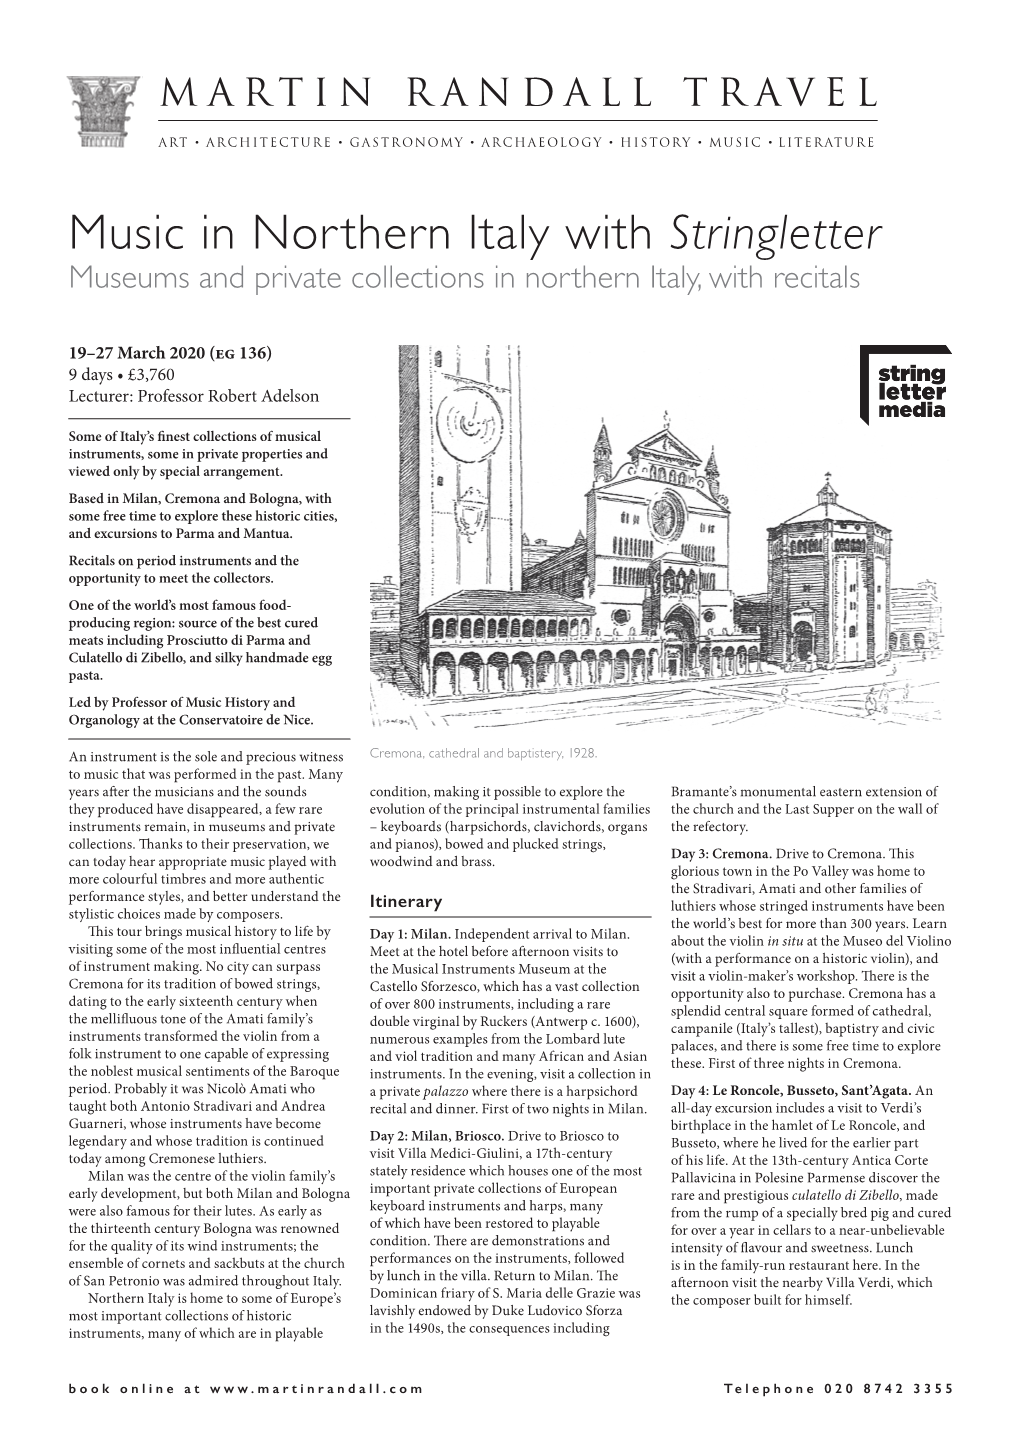 Music in Northern Italy with Stringletter Museums and Private Collections in Northern Italy, with Recitals